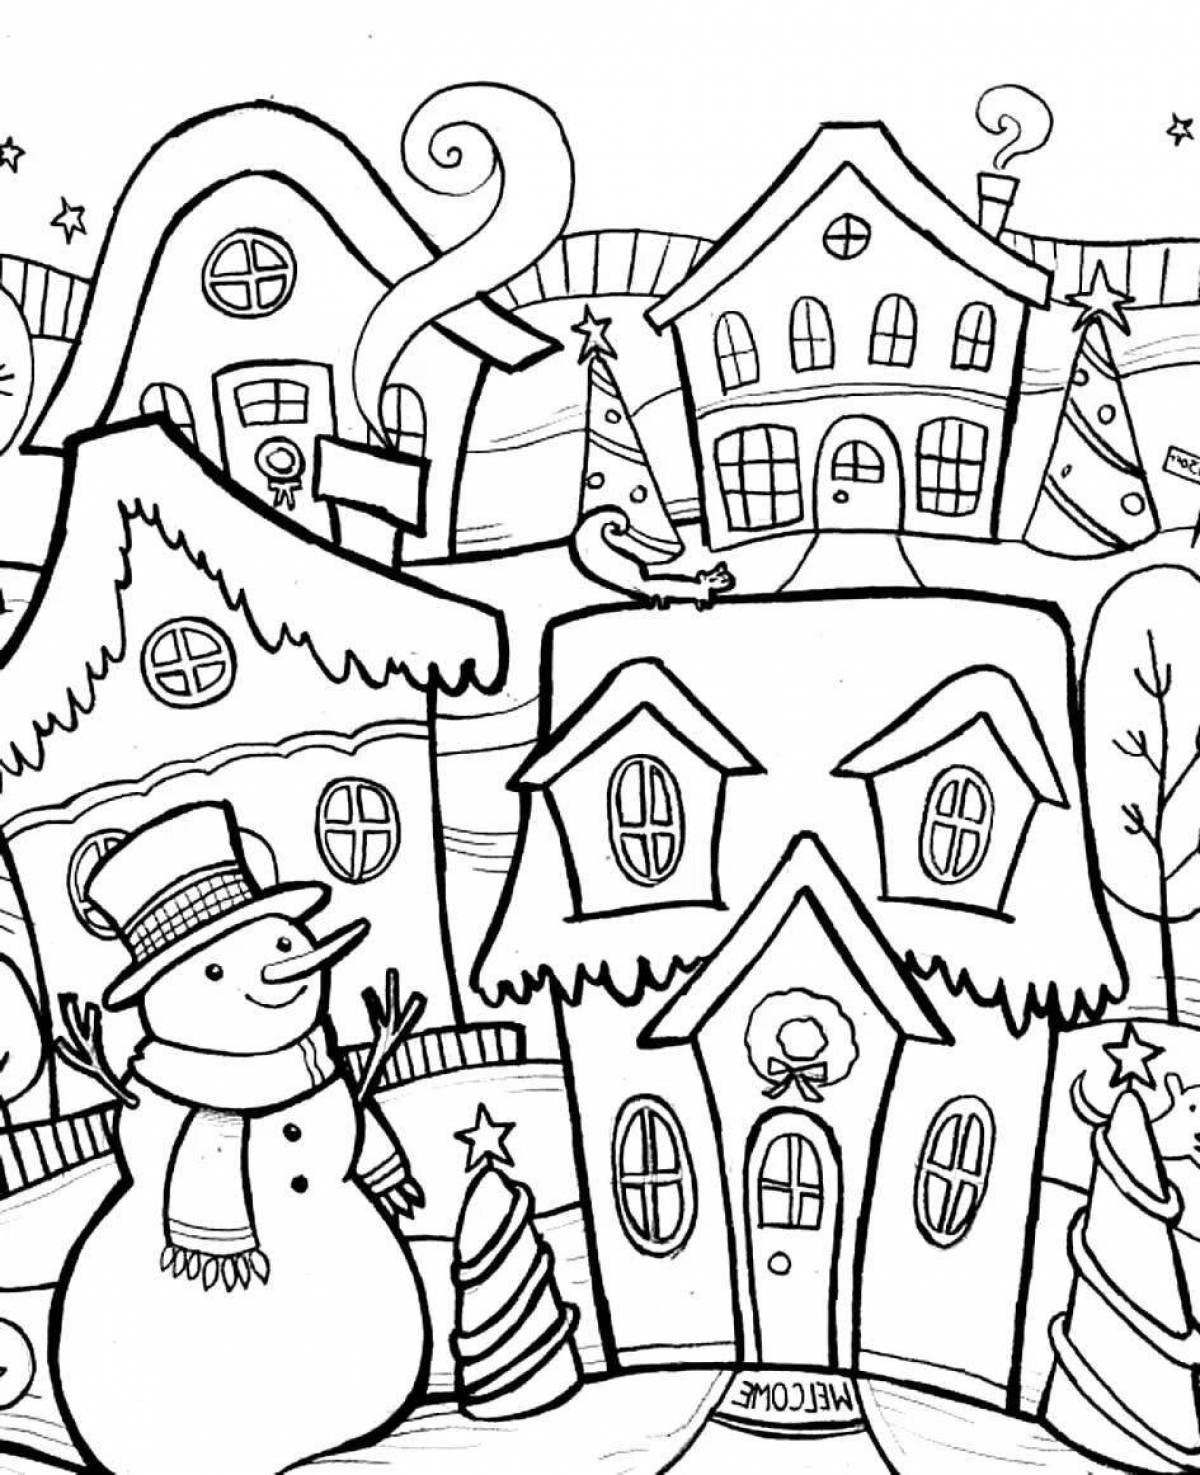 Coloring page wild village in winter